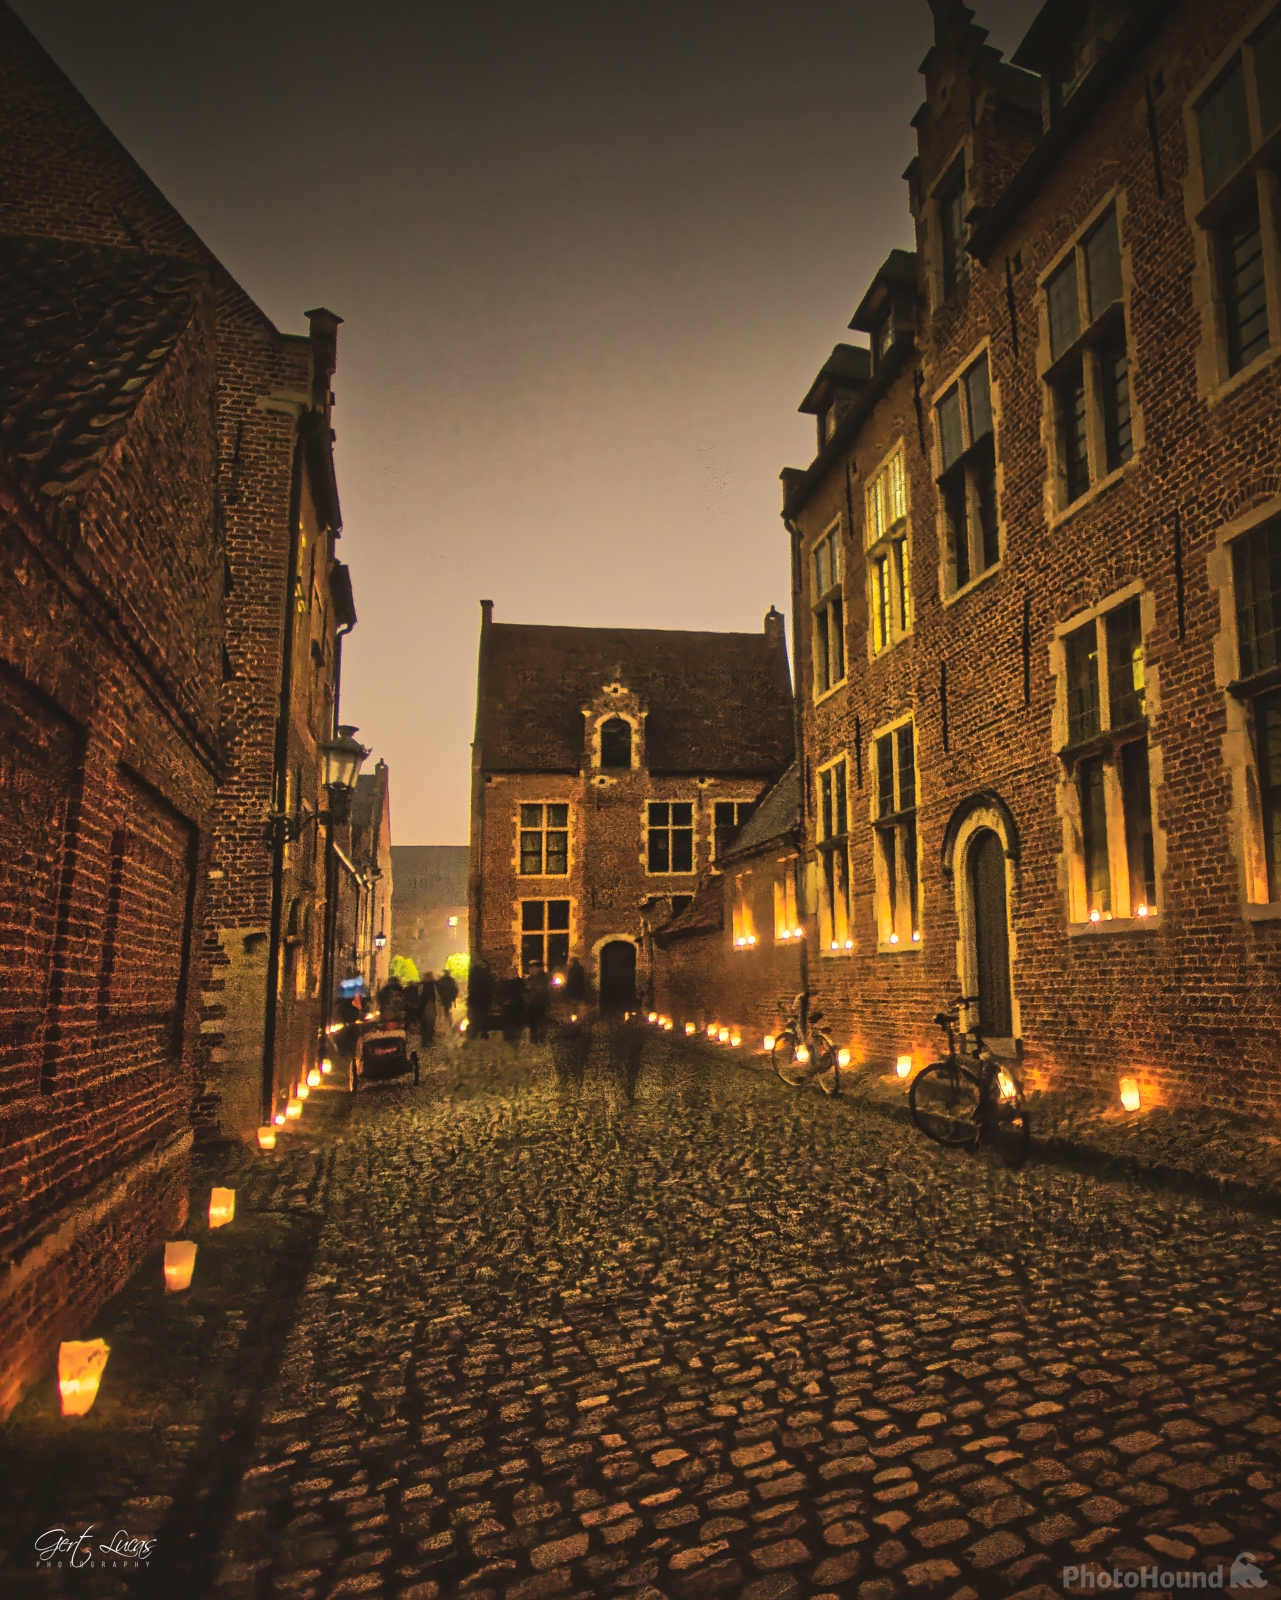 Image of Candle Lights Festival of Leuven Beguinage by Gert Lucas